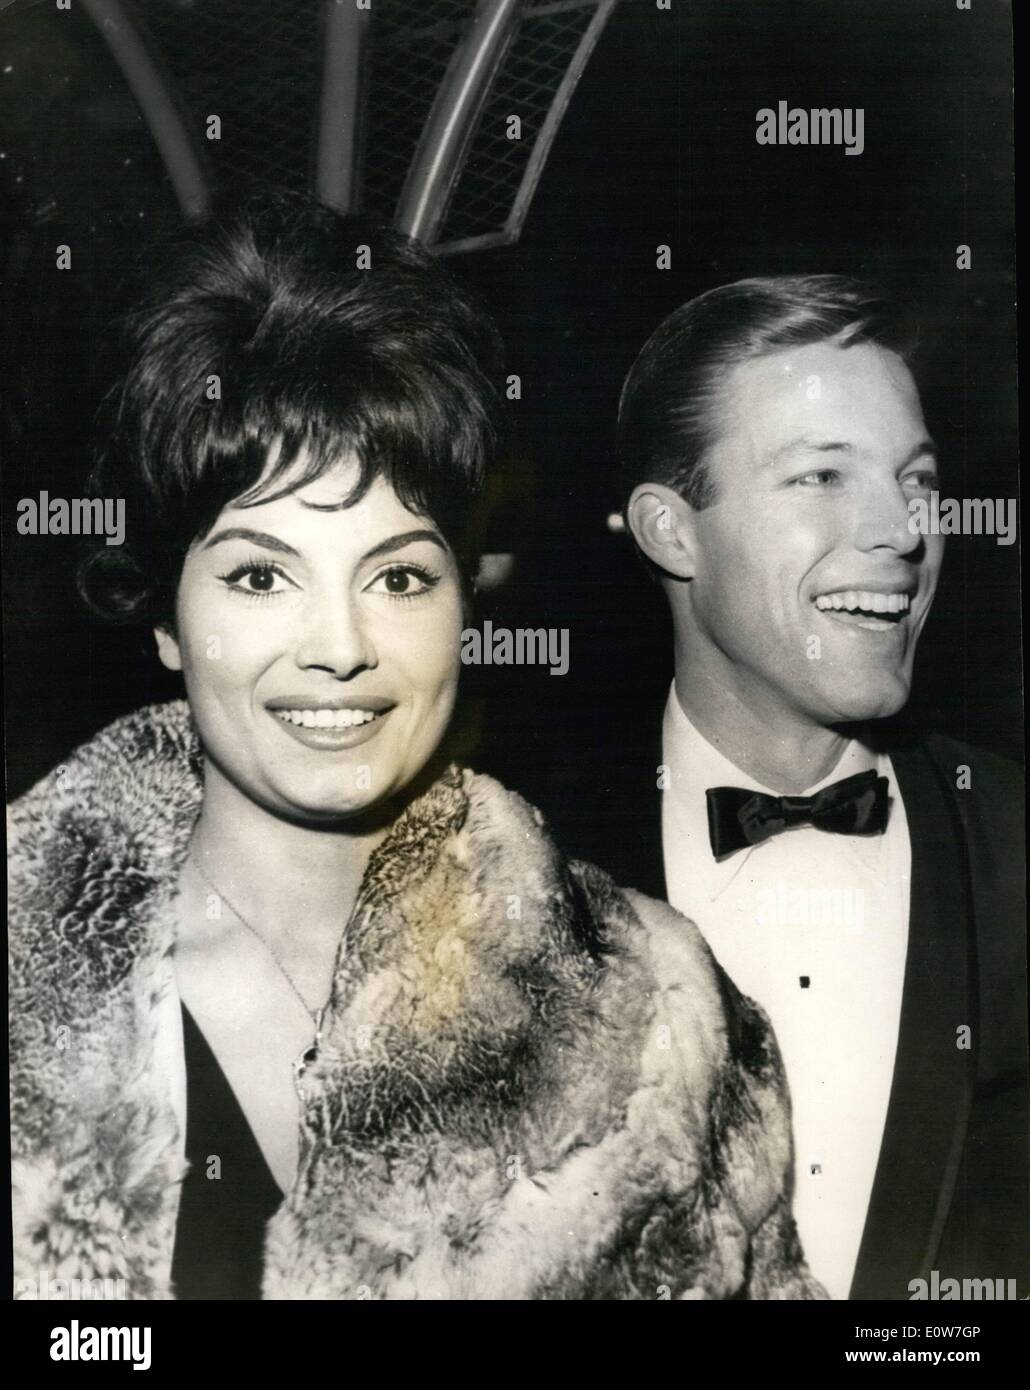 Dec. 12, 1961 - Royal Command Film Premiered In Hollywood: A Premiere for the film West Si Story, which has been chosen for the Royal Command Performance in London was held recently at Grauman's Chinese Theatre in Hollywood. Photo shows The new TV star Richard Chamberlain and his date, Italian actress Rosano Sohiaffino, attending the film showing at Grauman's. Stock Photo